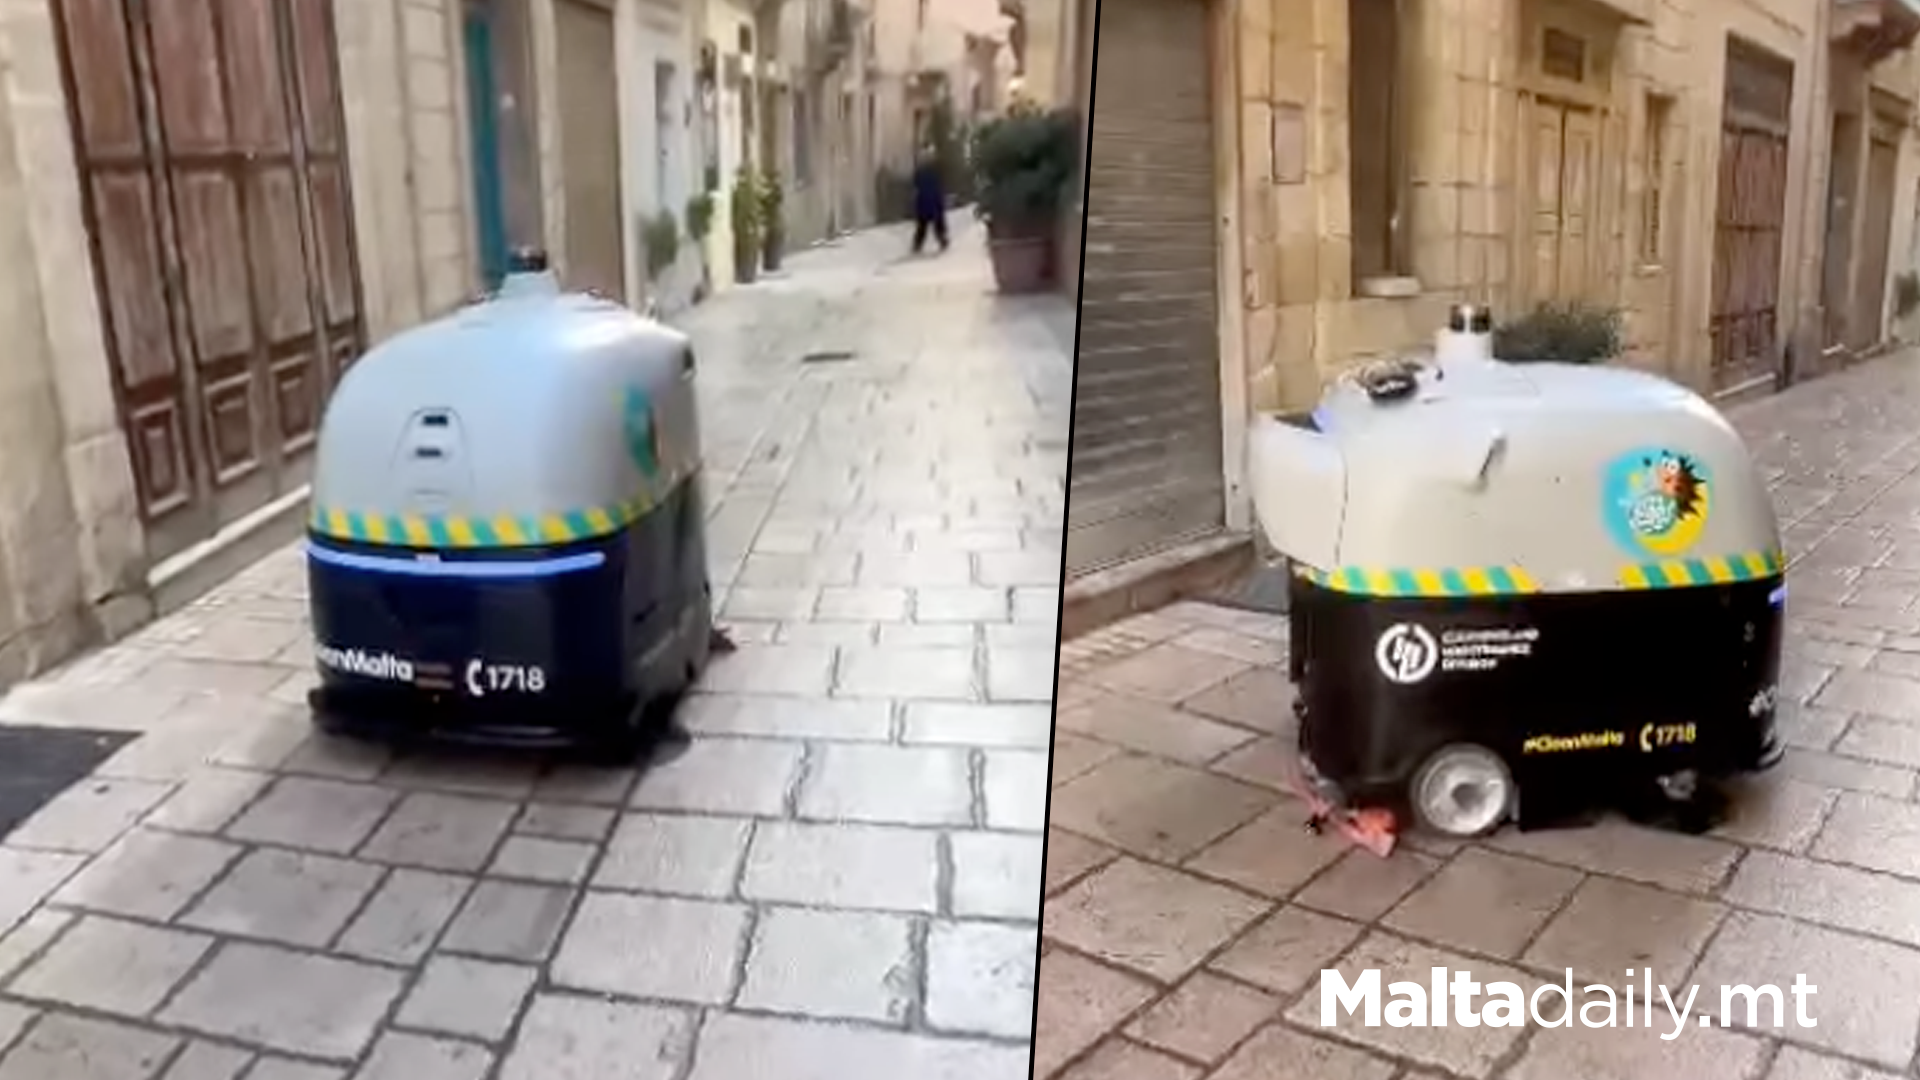 MAPPING OF MALTA’S ROADS BY ELECTRIC POWERED ROBOTS CONTINUES